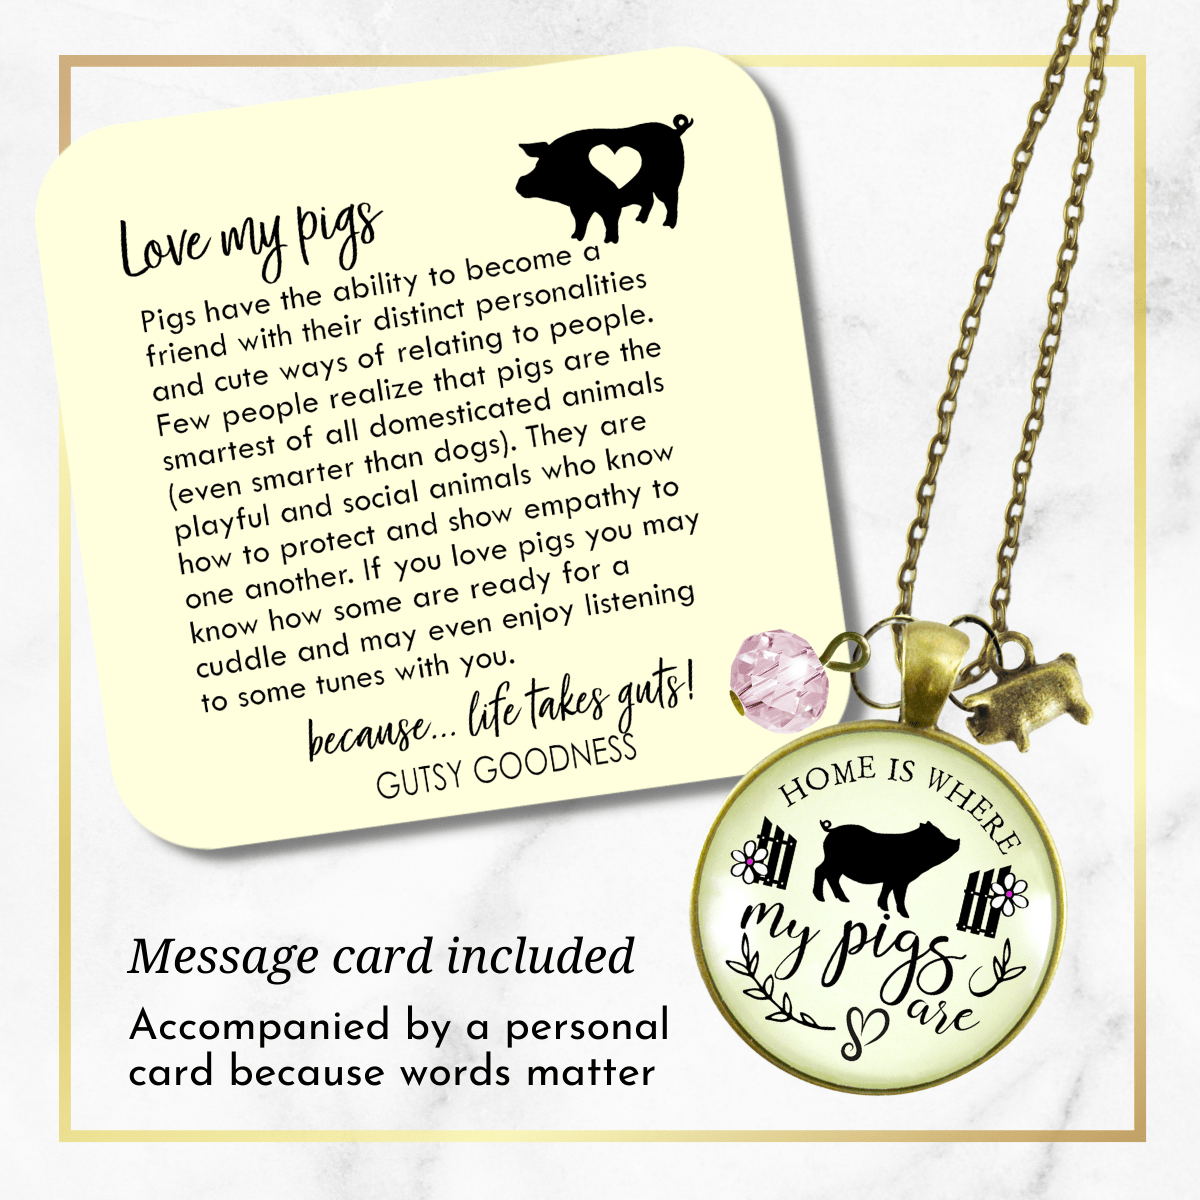 Gutsy Goodness Pig Necklace Home is Where My Pigs are Farmer Girl Inspired Jewelry - Gutsy Goodness;Pig Necklace Home Is Where My Pigs Are Farmer Girl Inspired Jewelry - Gutsy Goodness Handmade Jewelry Gifts